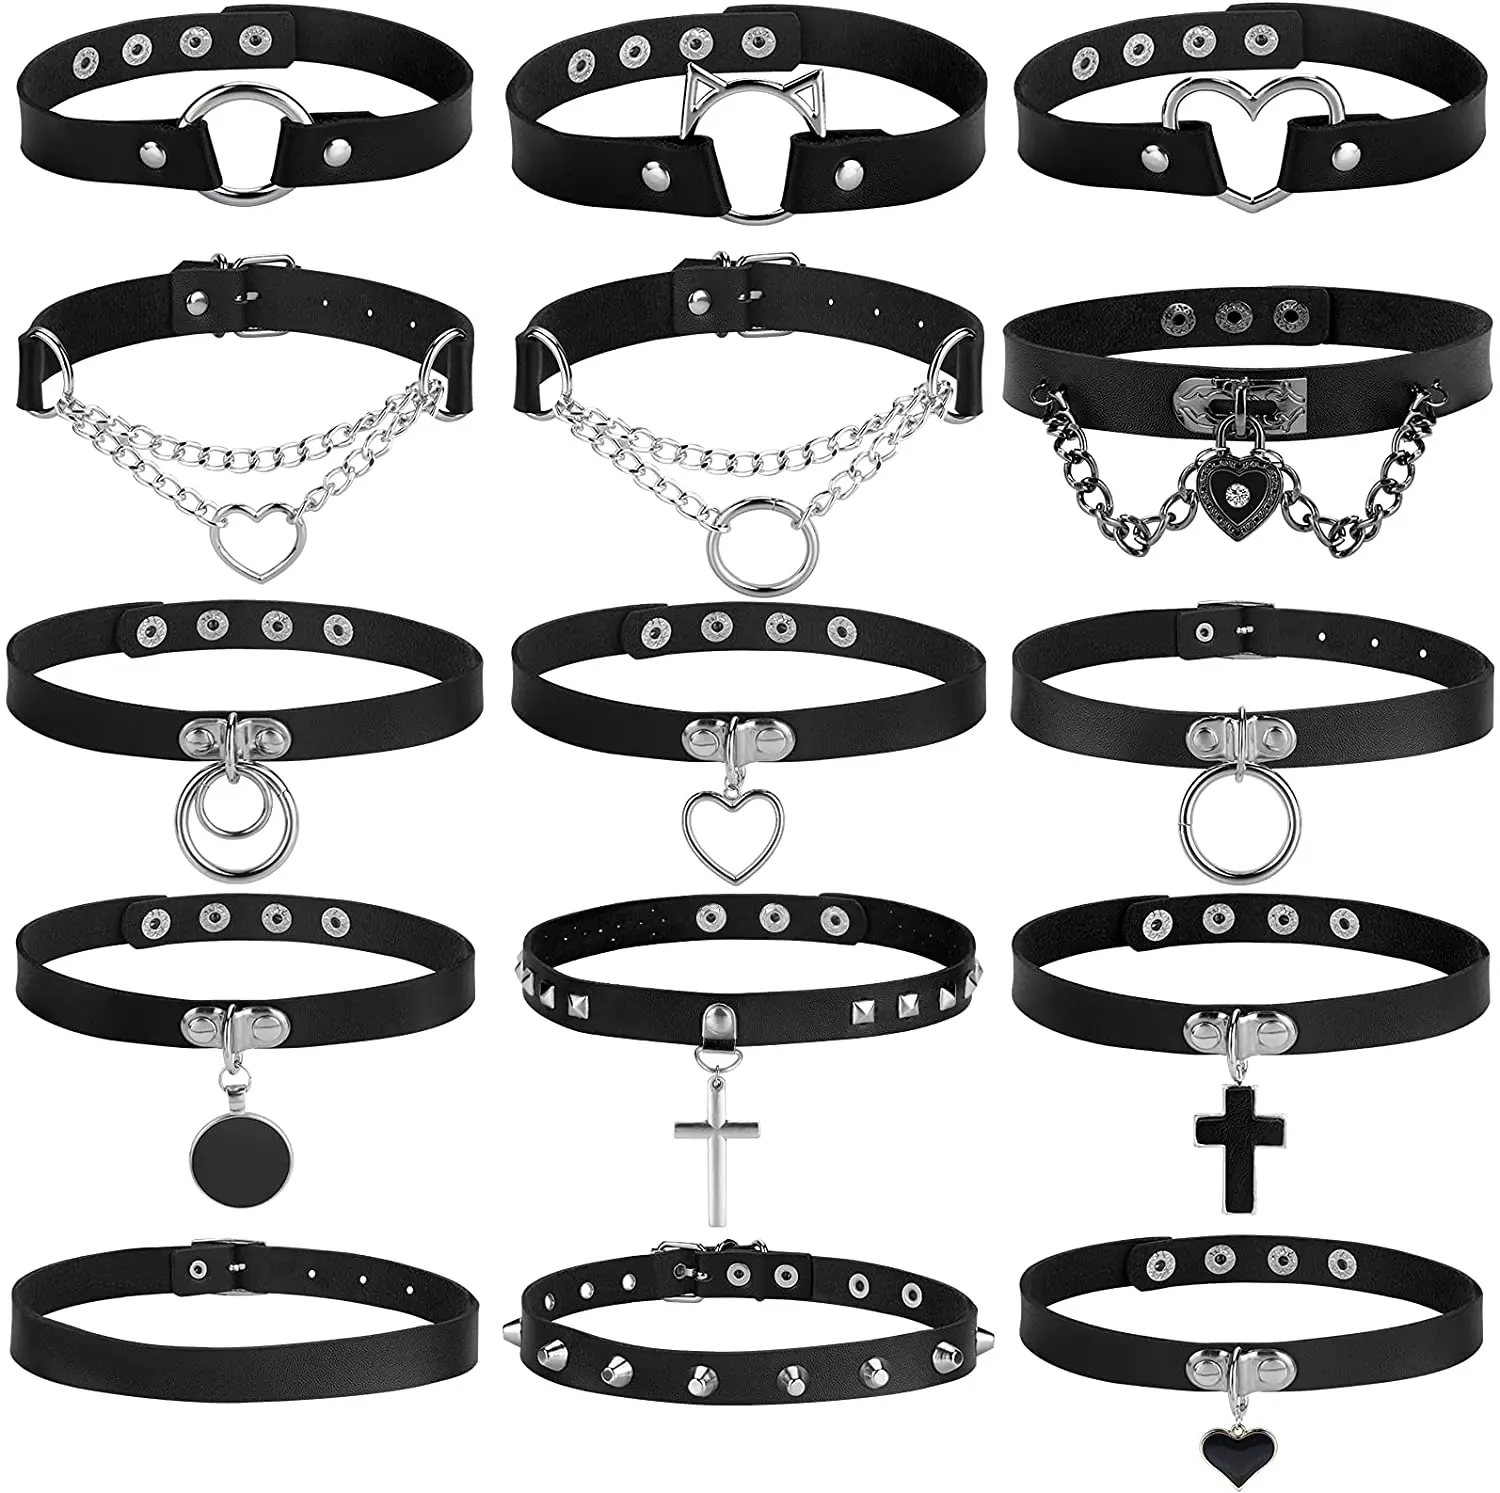 

Woman Black Punk Choker Collar Necklace Pu Leather Goth Rivets Choker Necklace Pendientes Party Club Sexy Gothic Femme Jewelry